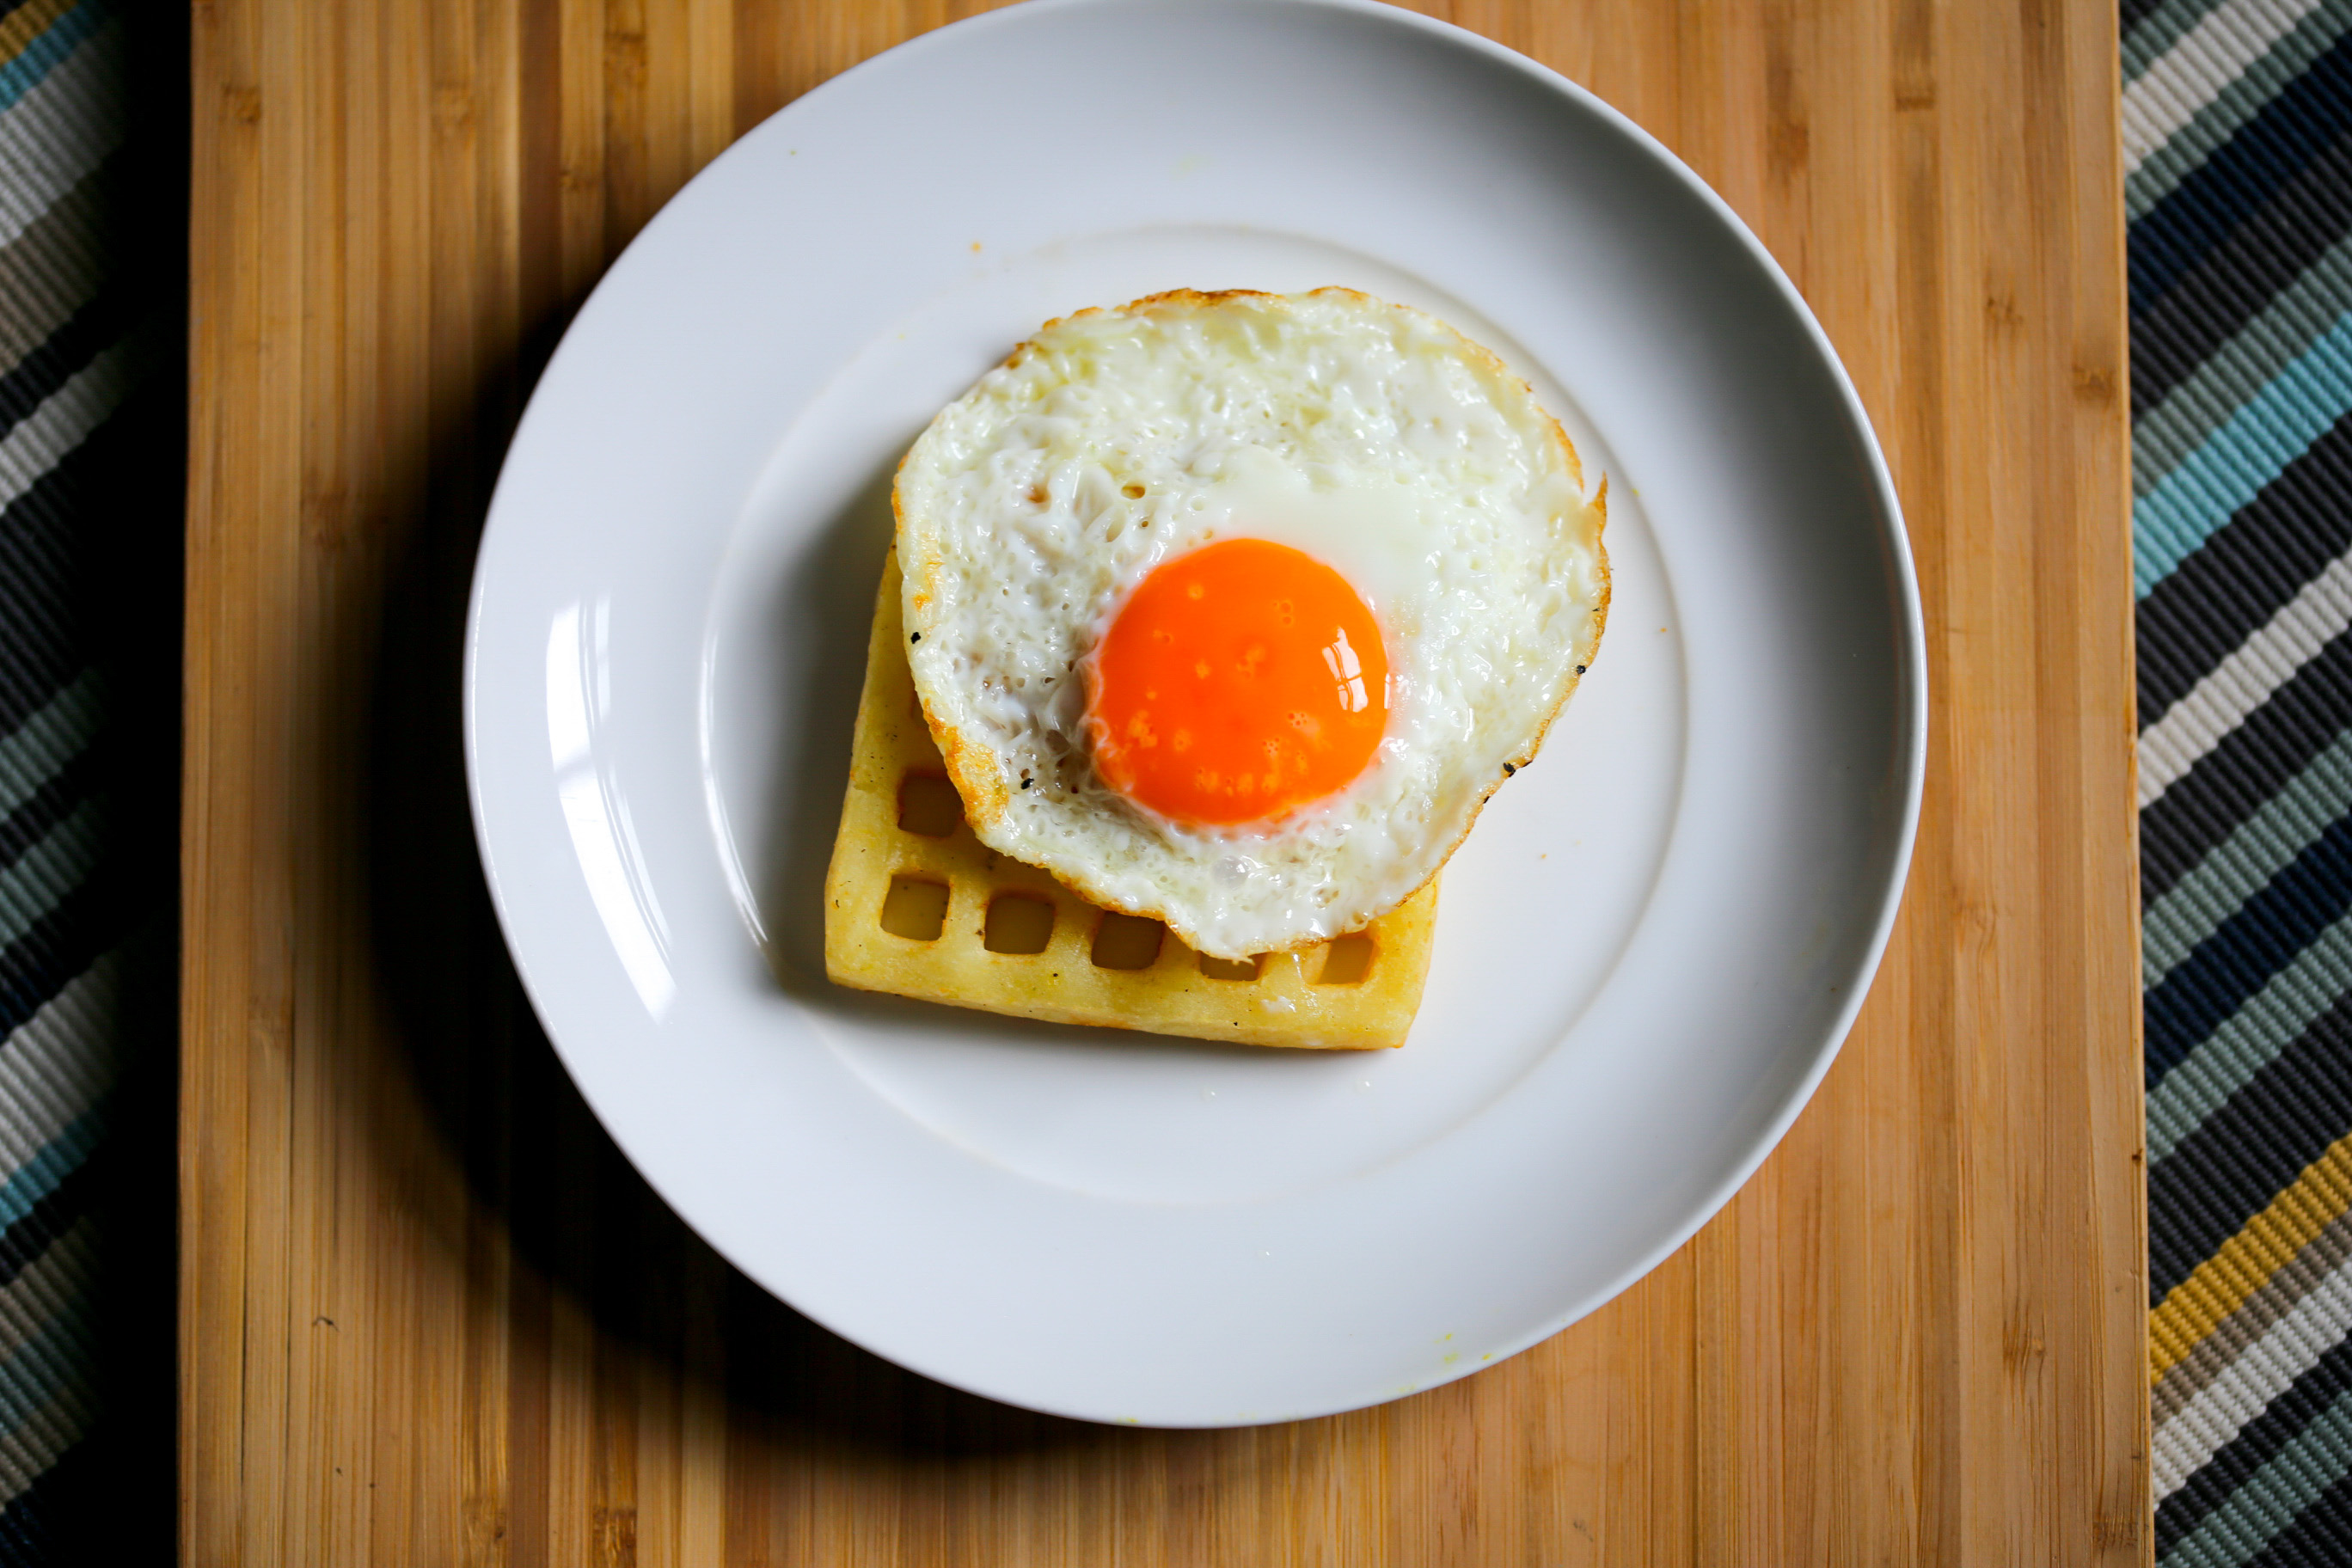 A fried egg atop a waffle on a white plate, served on a striped placemat